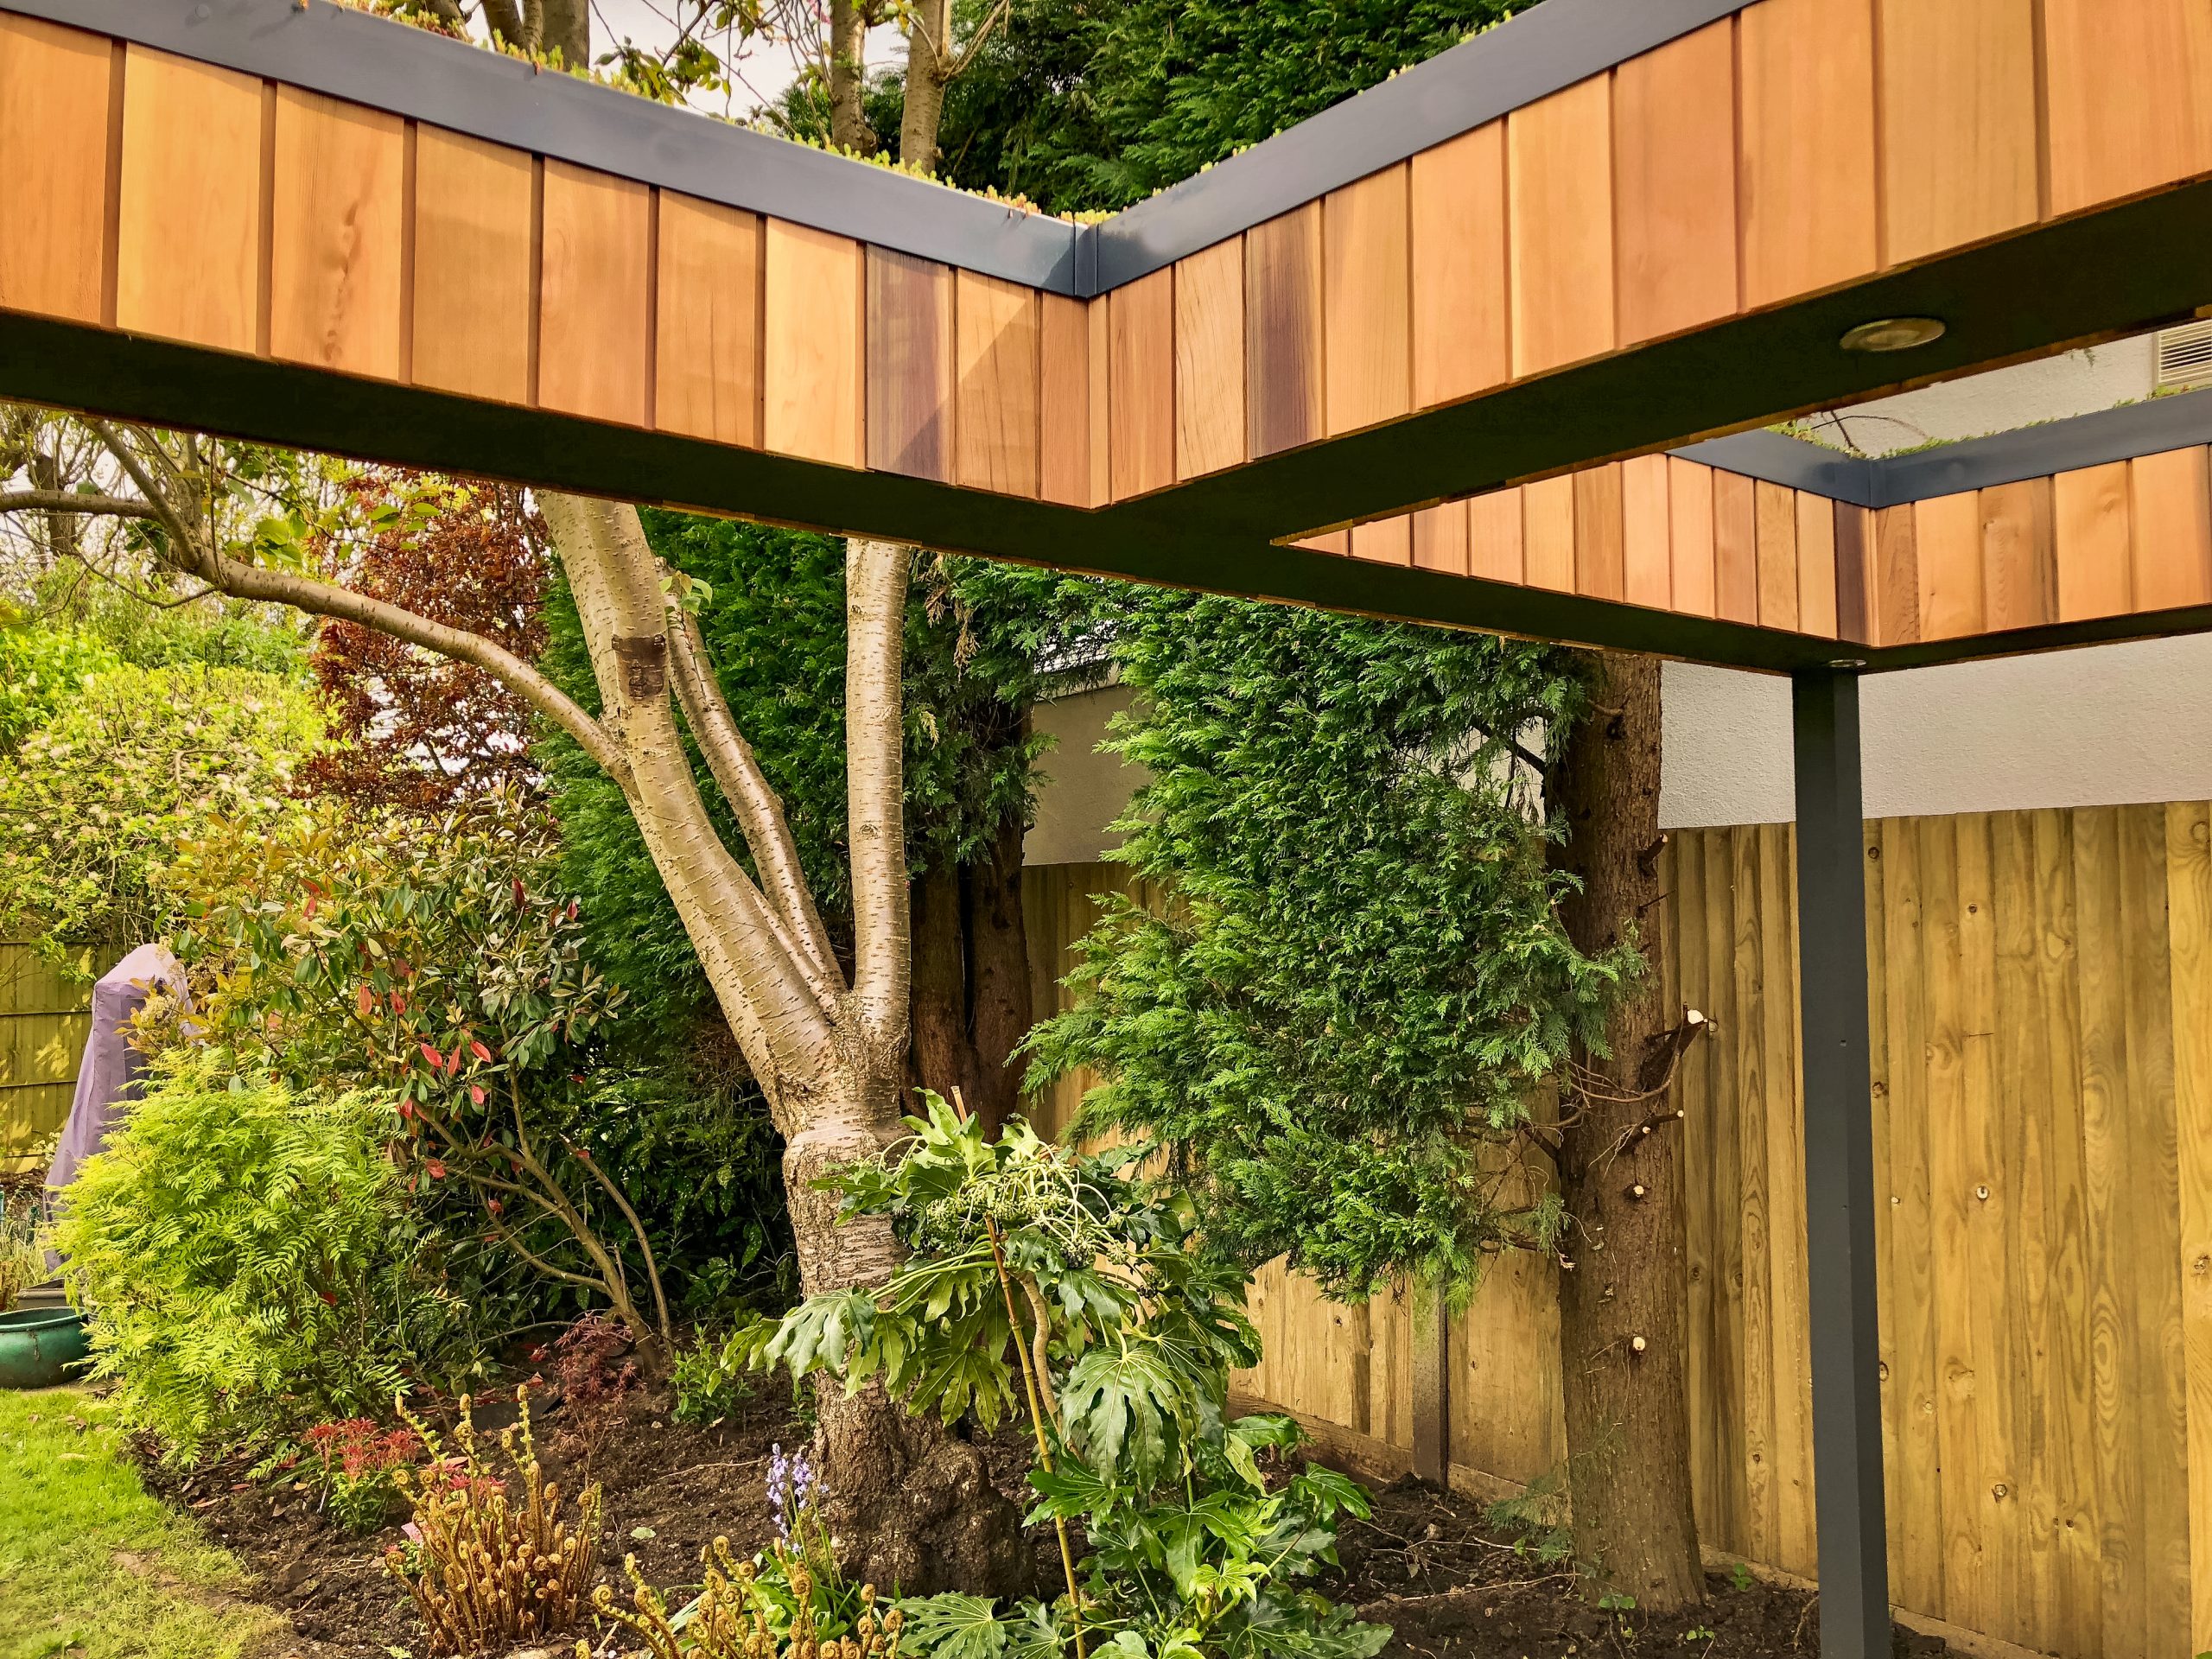 Exterior view of Vivid Green garden office space's overhang with western red cedar cladding, grey roof trim and sedum roof, set against a lush green garden backdrop.